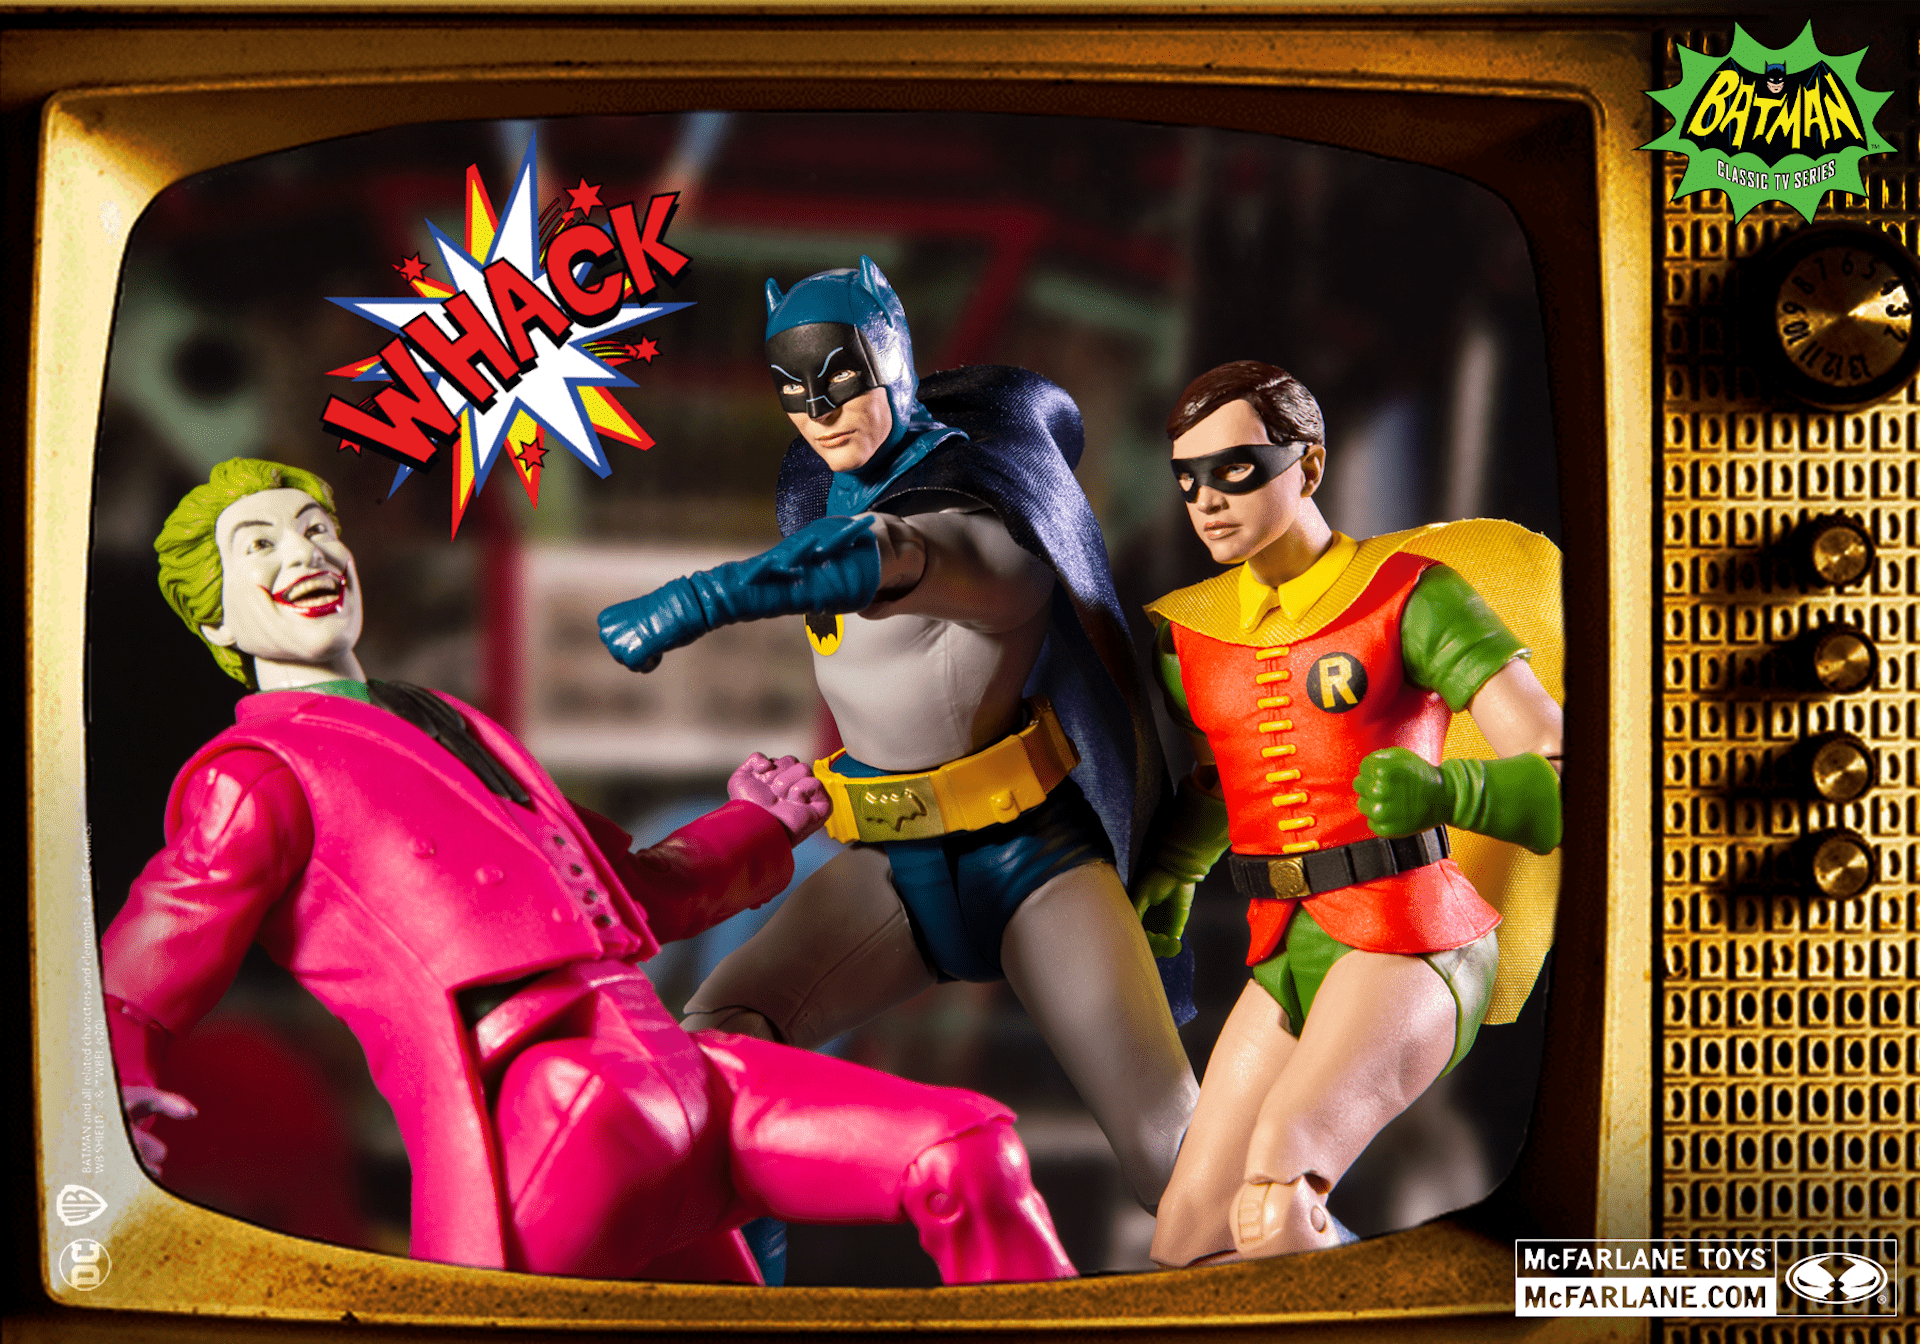 McFarlane Toys and Target team up for Batman Classic TV Series Collection